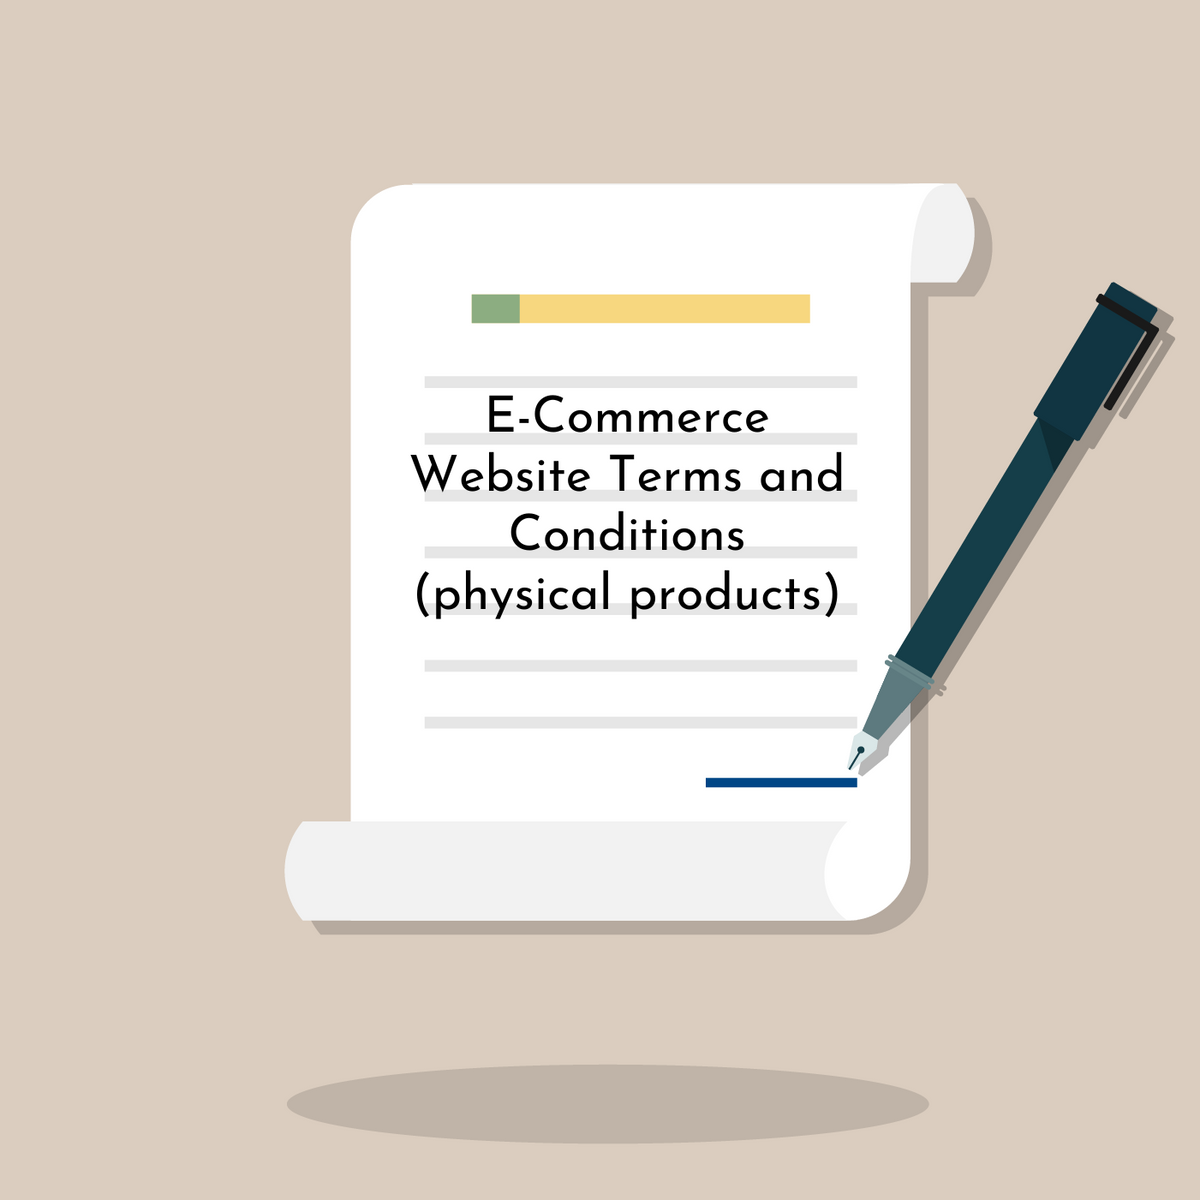 E-Commerce Website Terms and Conditions (Physical Product)